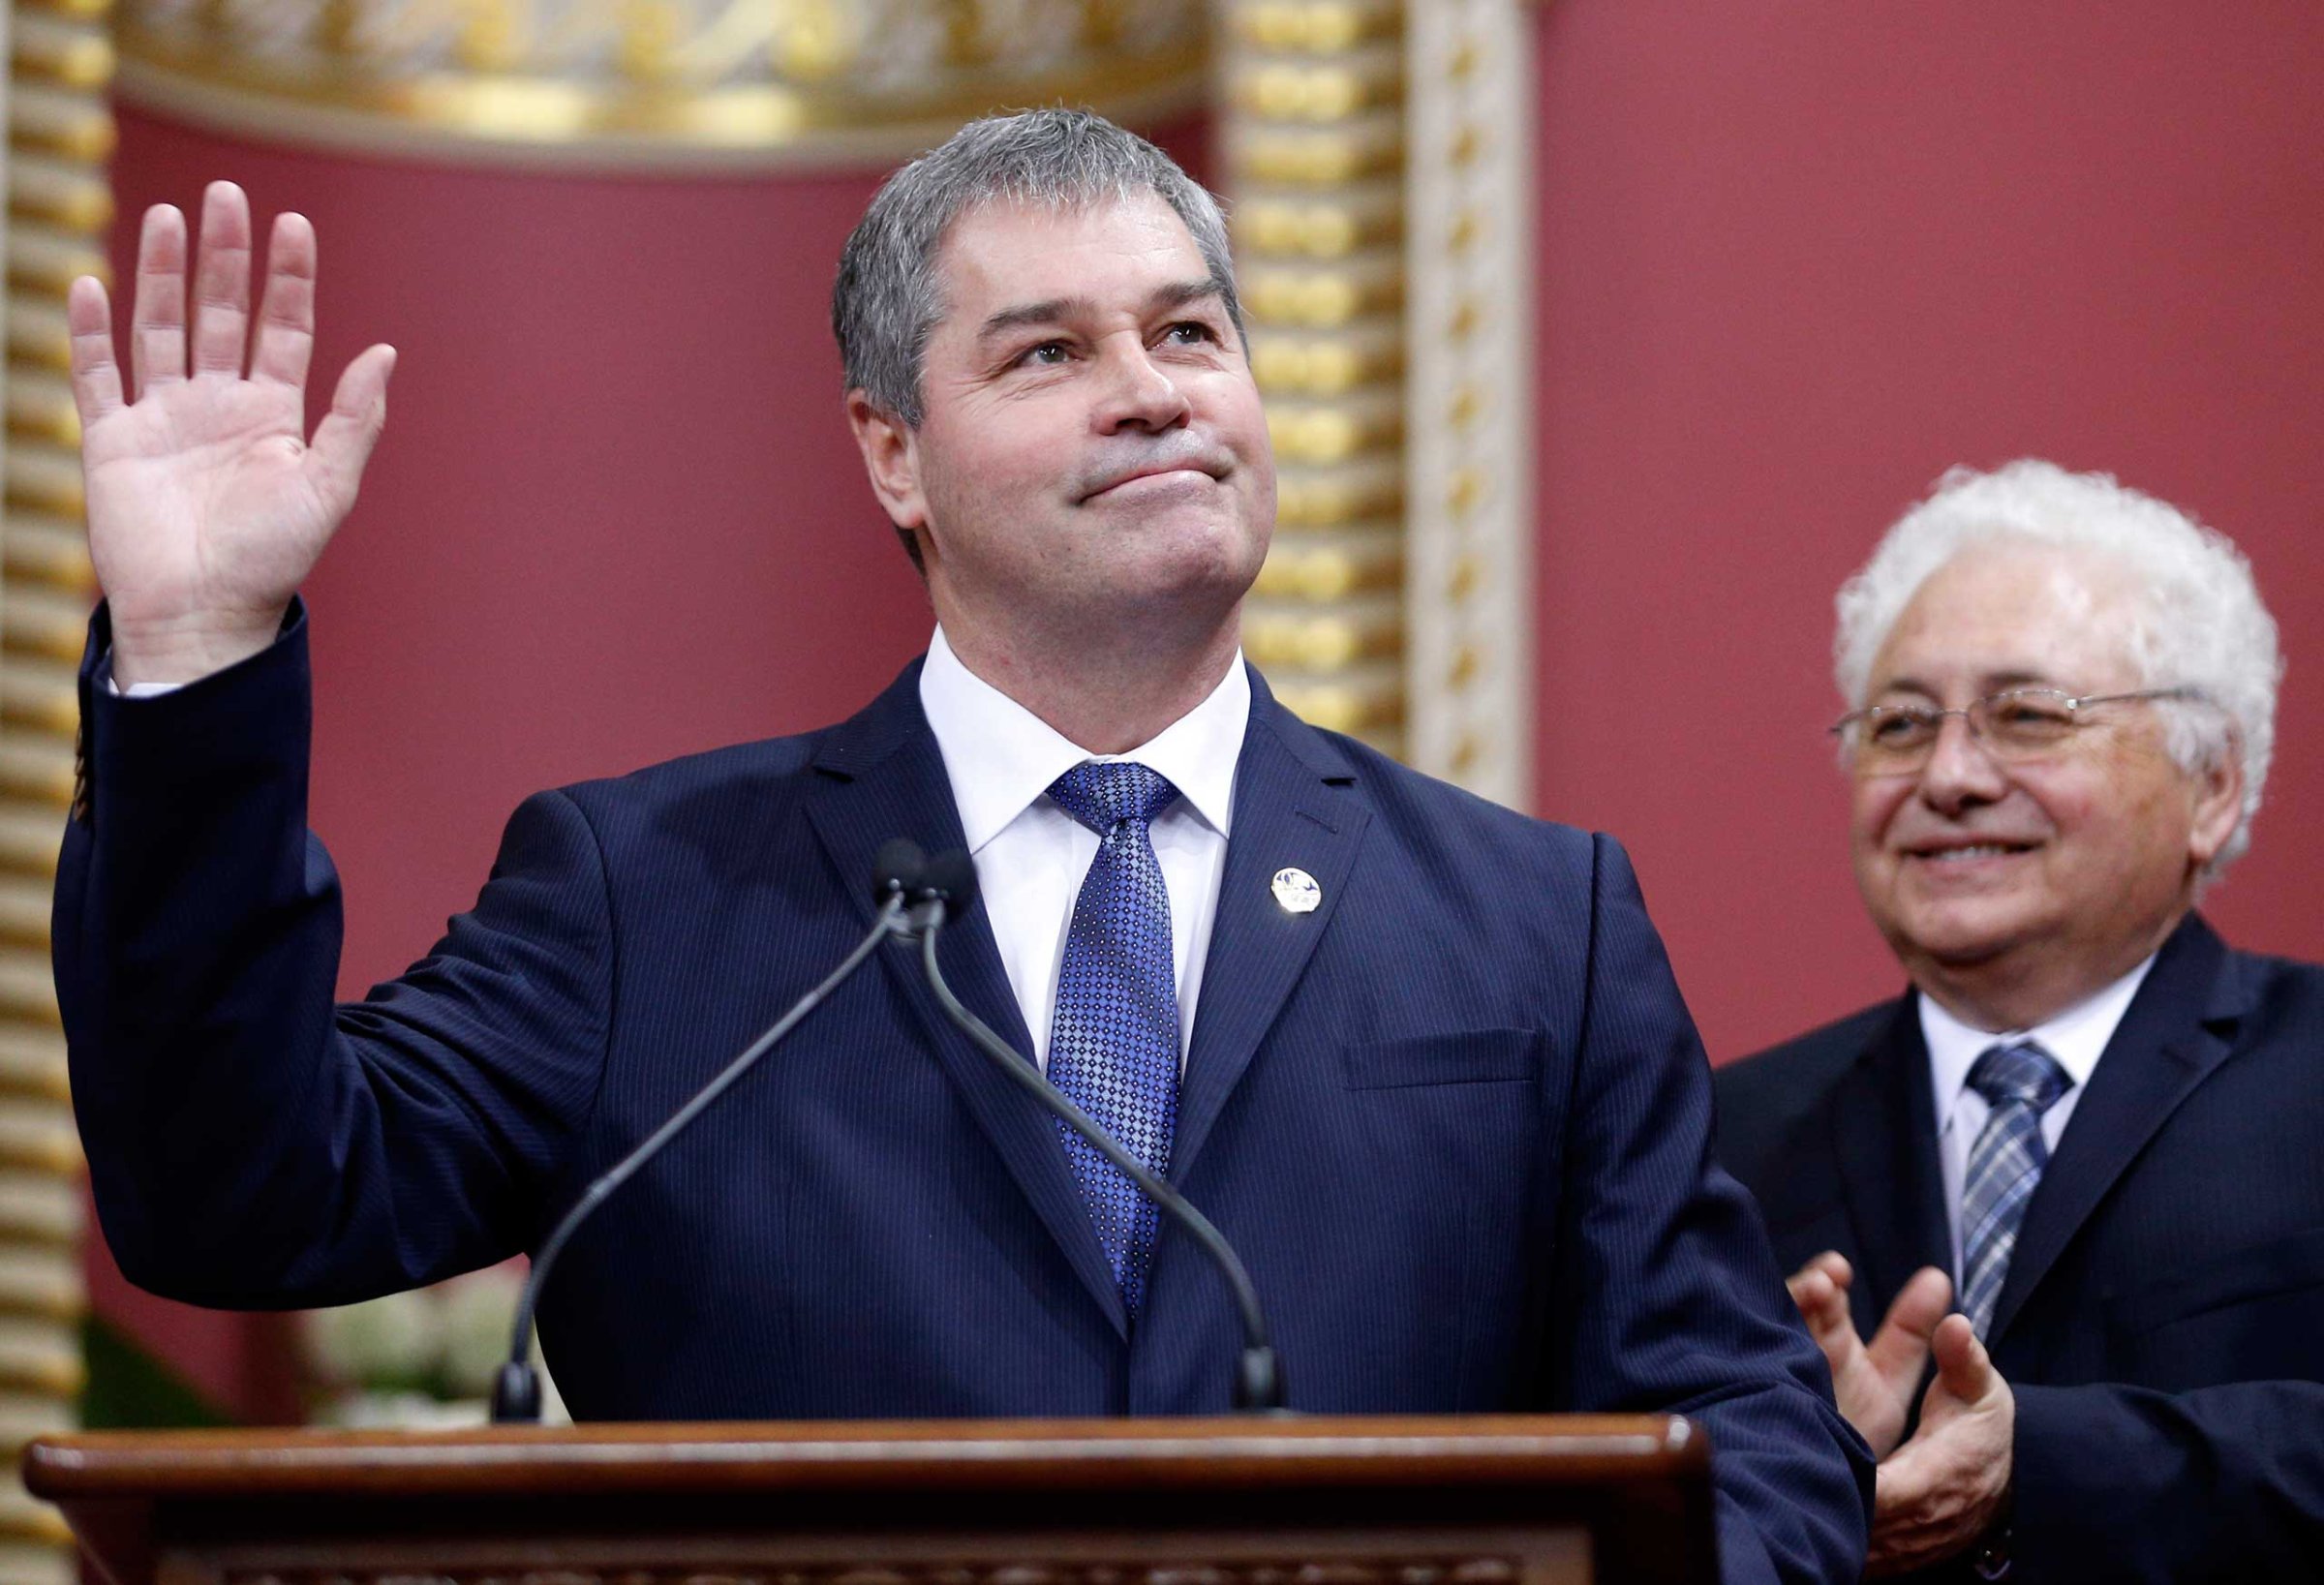 Quebec's Minister of Education Yves Bolduc waves to the crowd after being appointed by Premier Philippe Couillard during a swearing-in ceremony at the National Assembly in Quebec City, April 23, 2014.